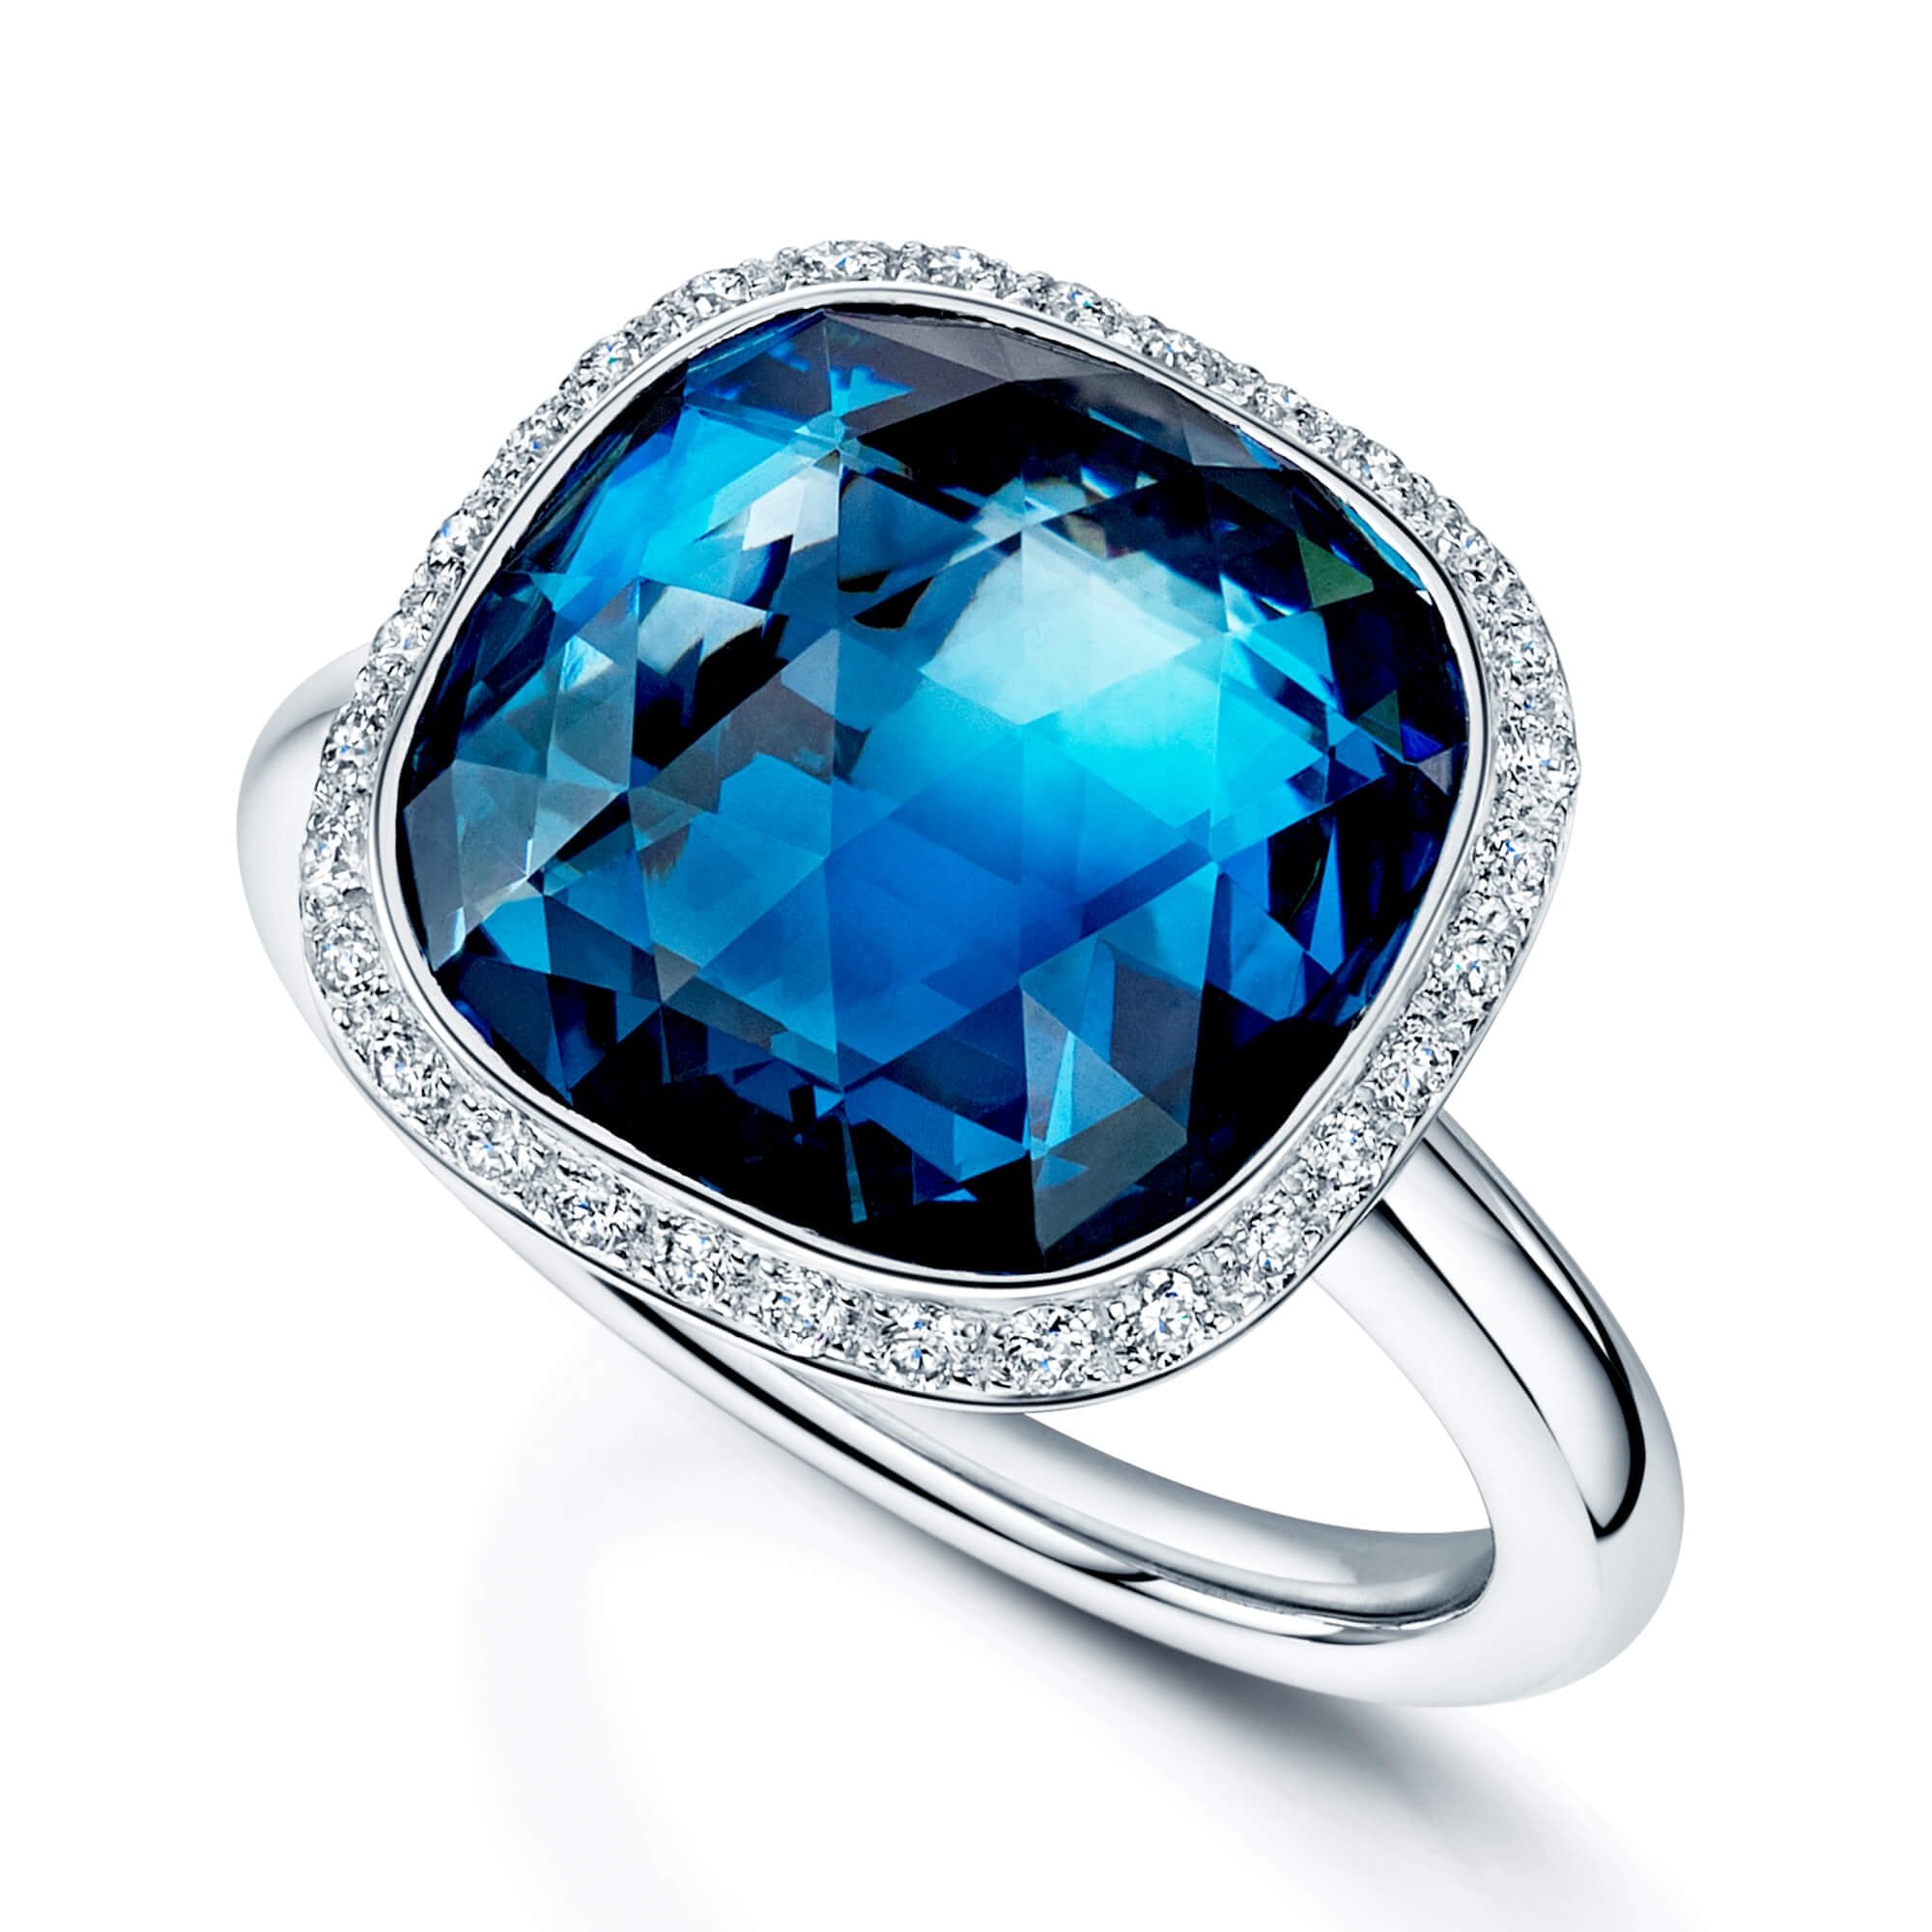 18ct White Gold London Blue Topaz Fancy Ring With A Round Brilliant Cut Halo Surround